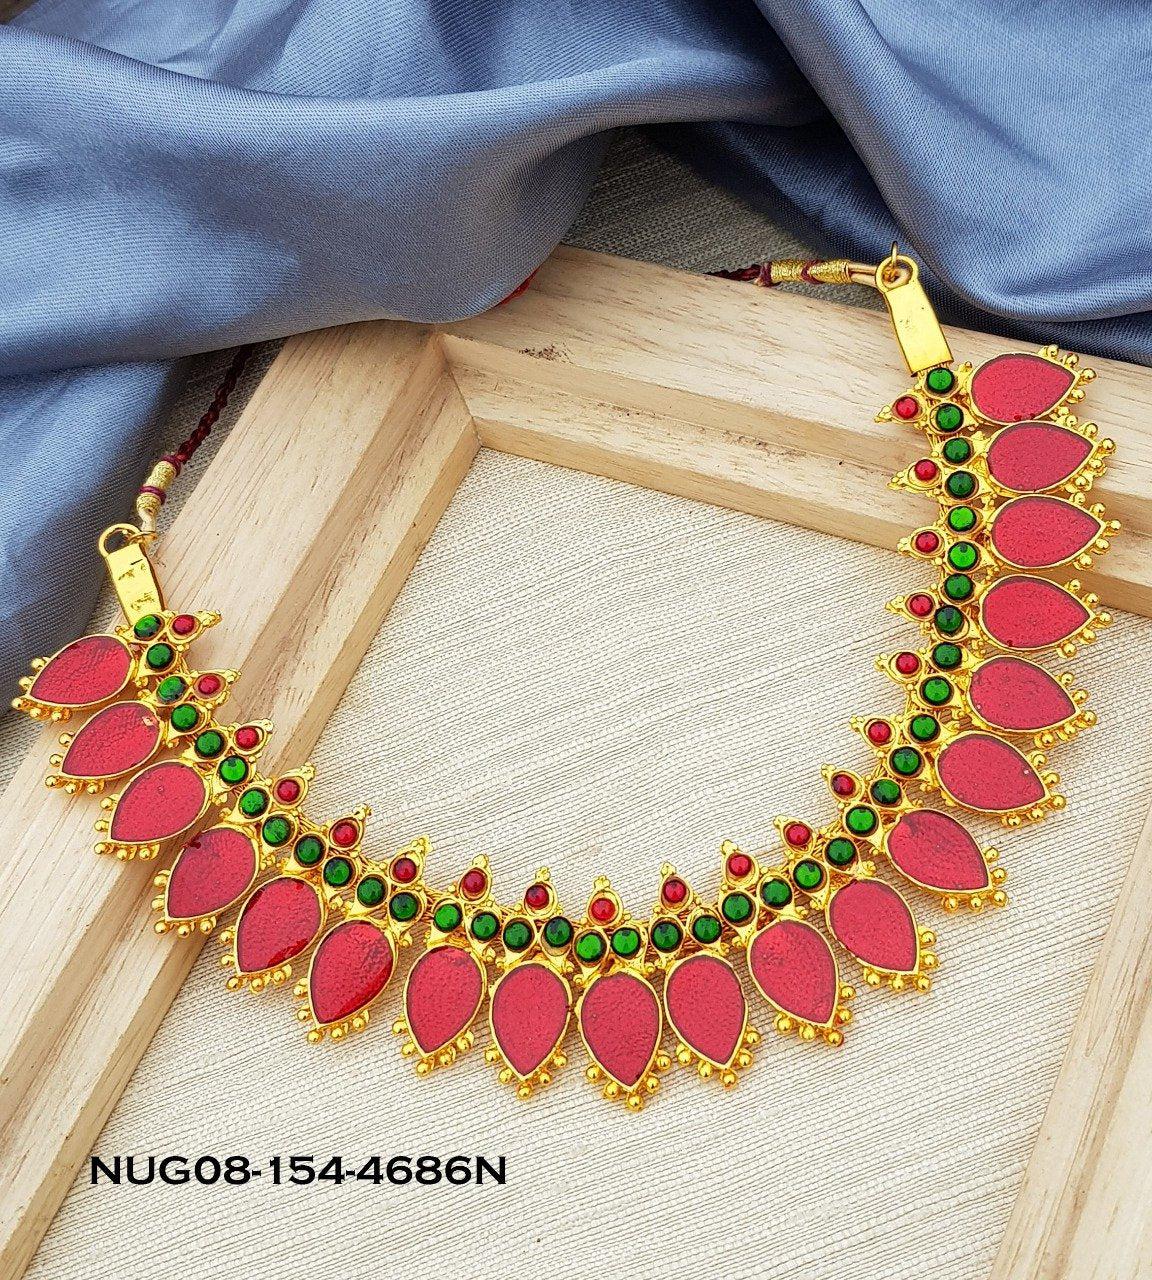 Micro Gold Plated Red Meena nagapadam necklace set suitable for Marriages Bharat Natyam and occasions 4686N